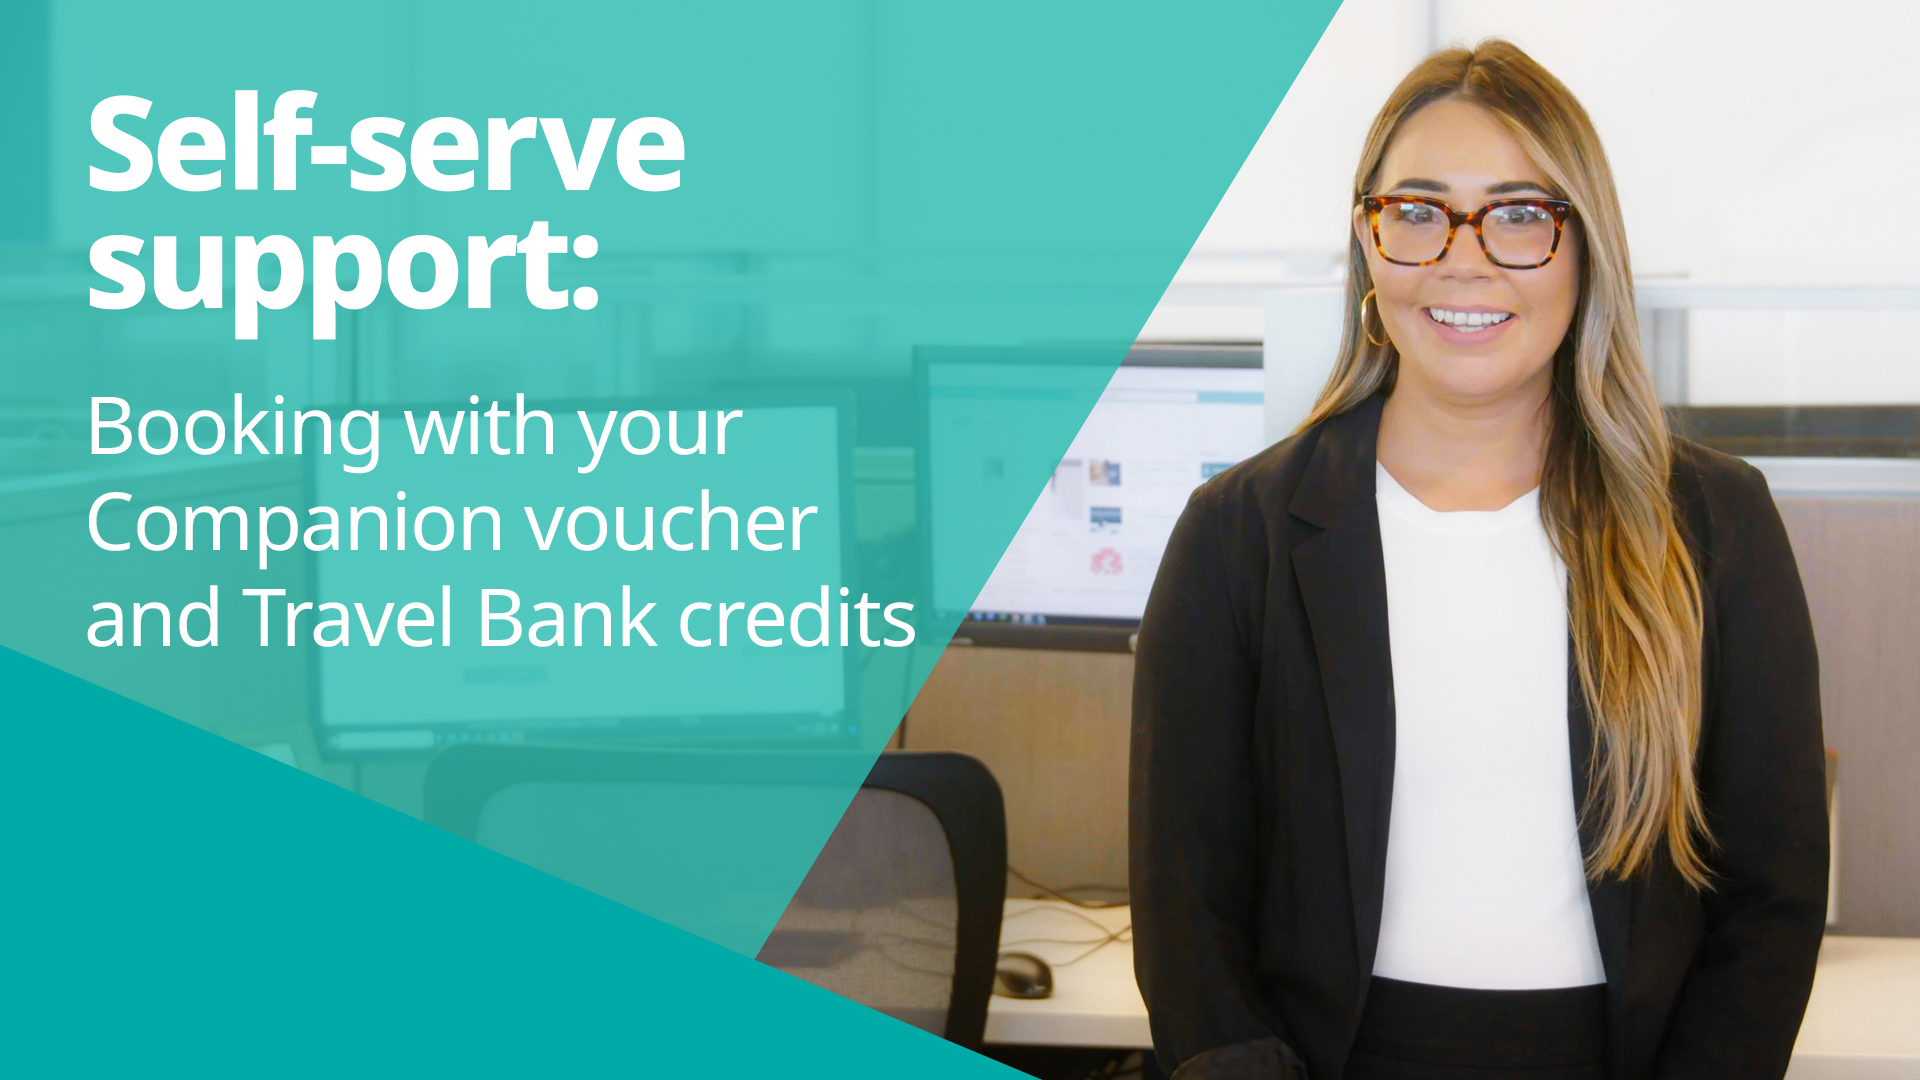 Self-serve support: Booking with your Companion voucher and Travel Credits with service agent Arianna